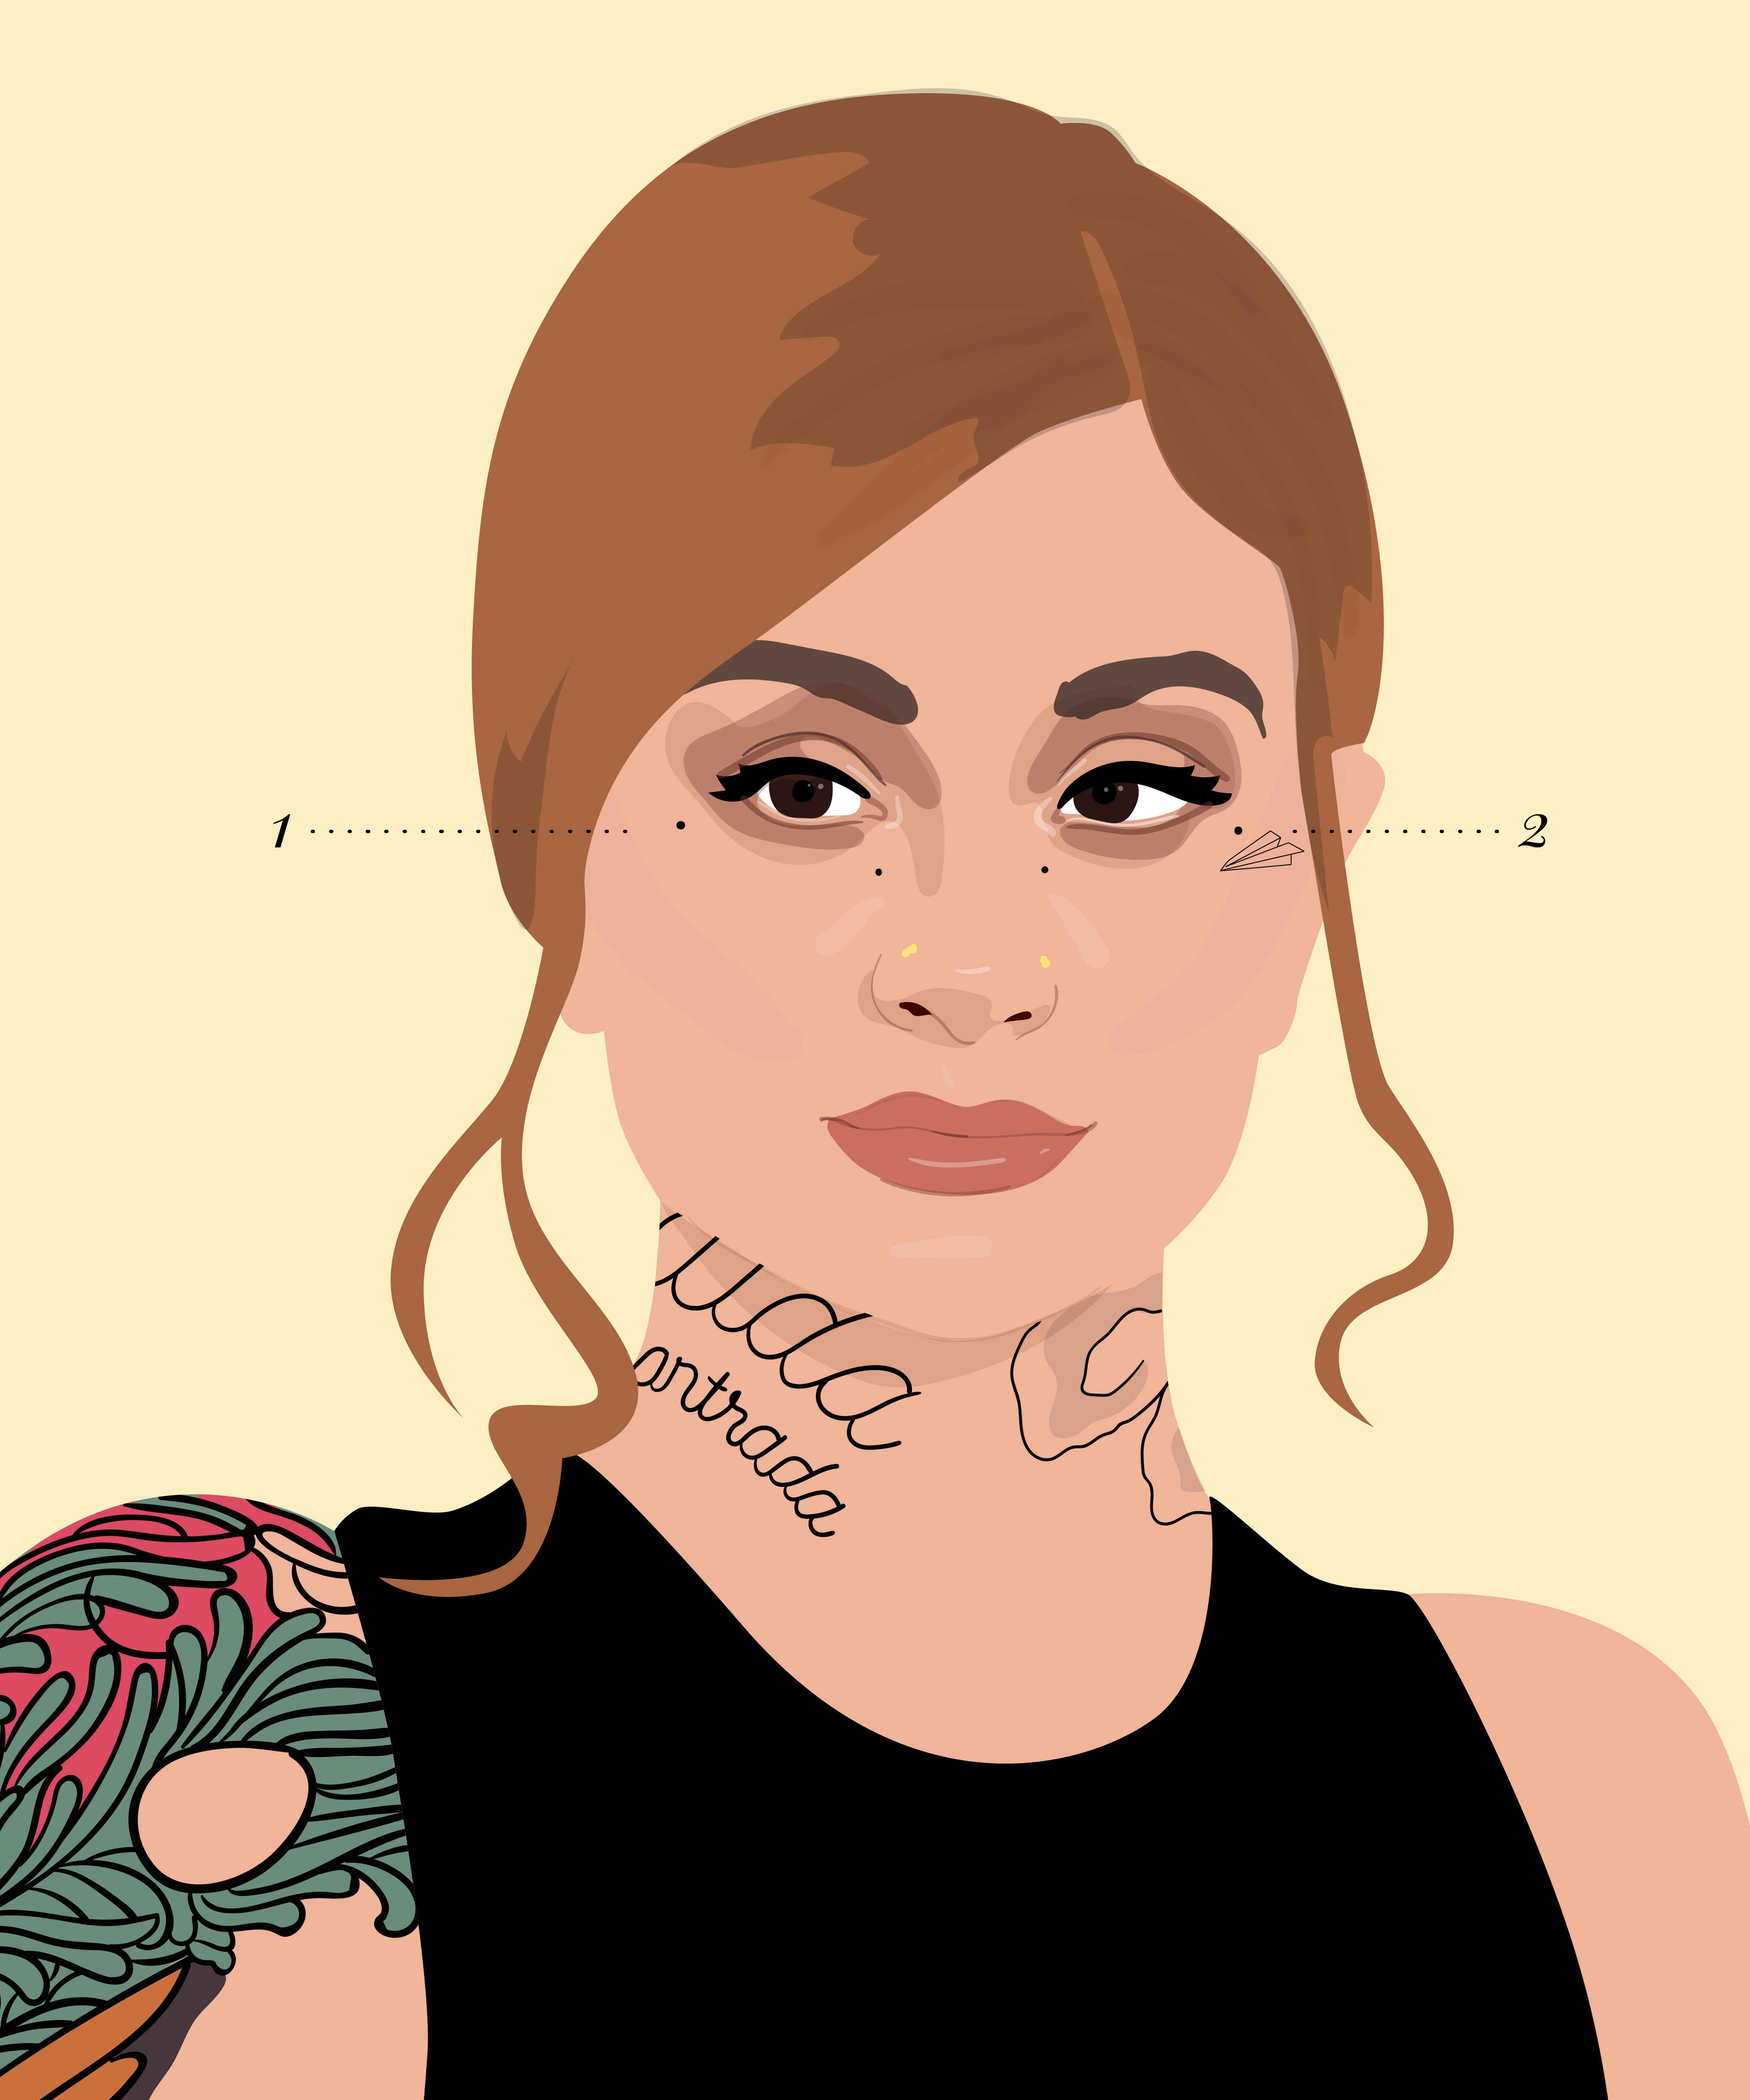 a handy guide to kehlani’s coolest tattoos